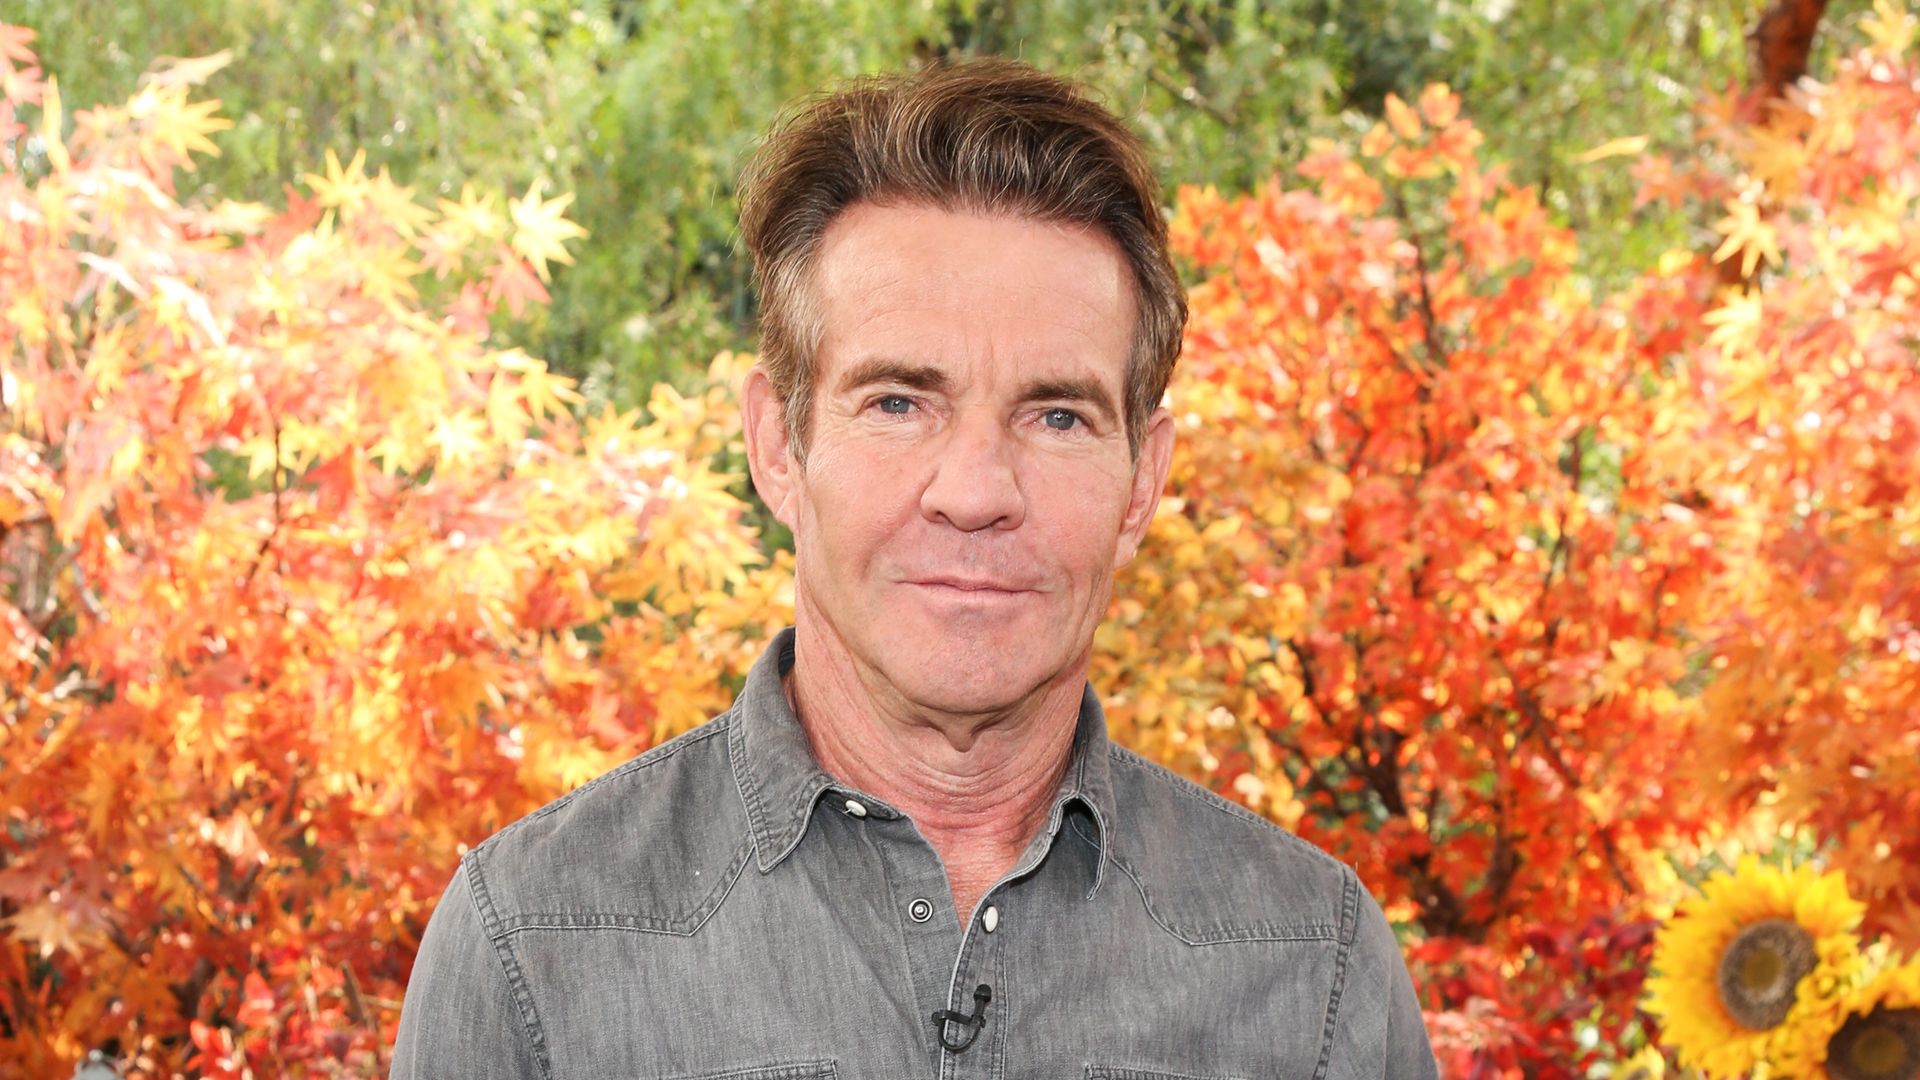 Dennis Quaid makes candid confession about addiction struggles: 'I'm grateful to be alive'